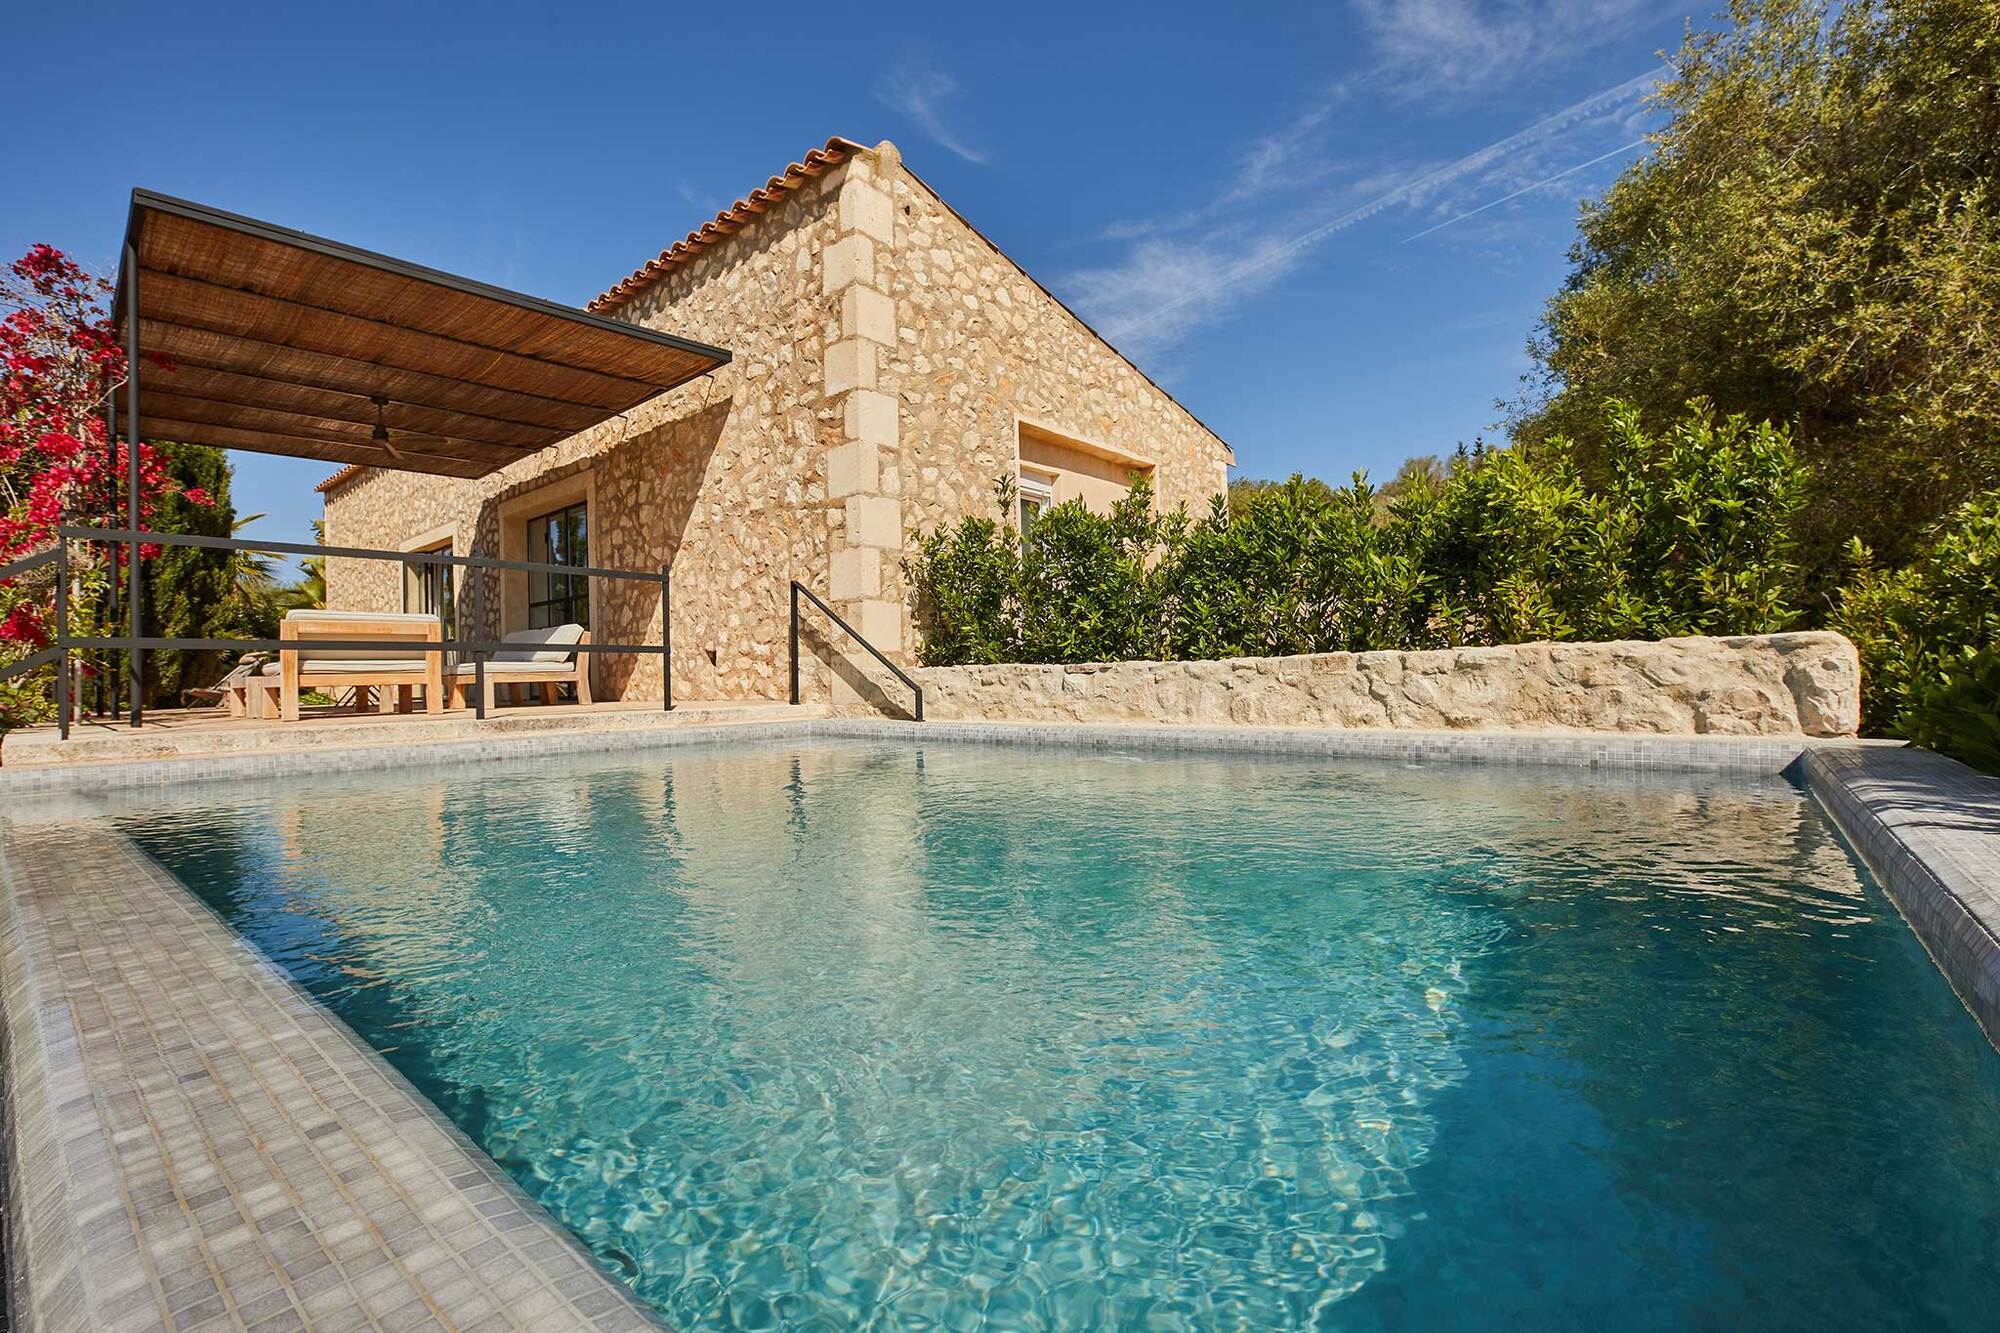 Hotels in Mallorca: 20 ideal accommodation options on the fabulous island